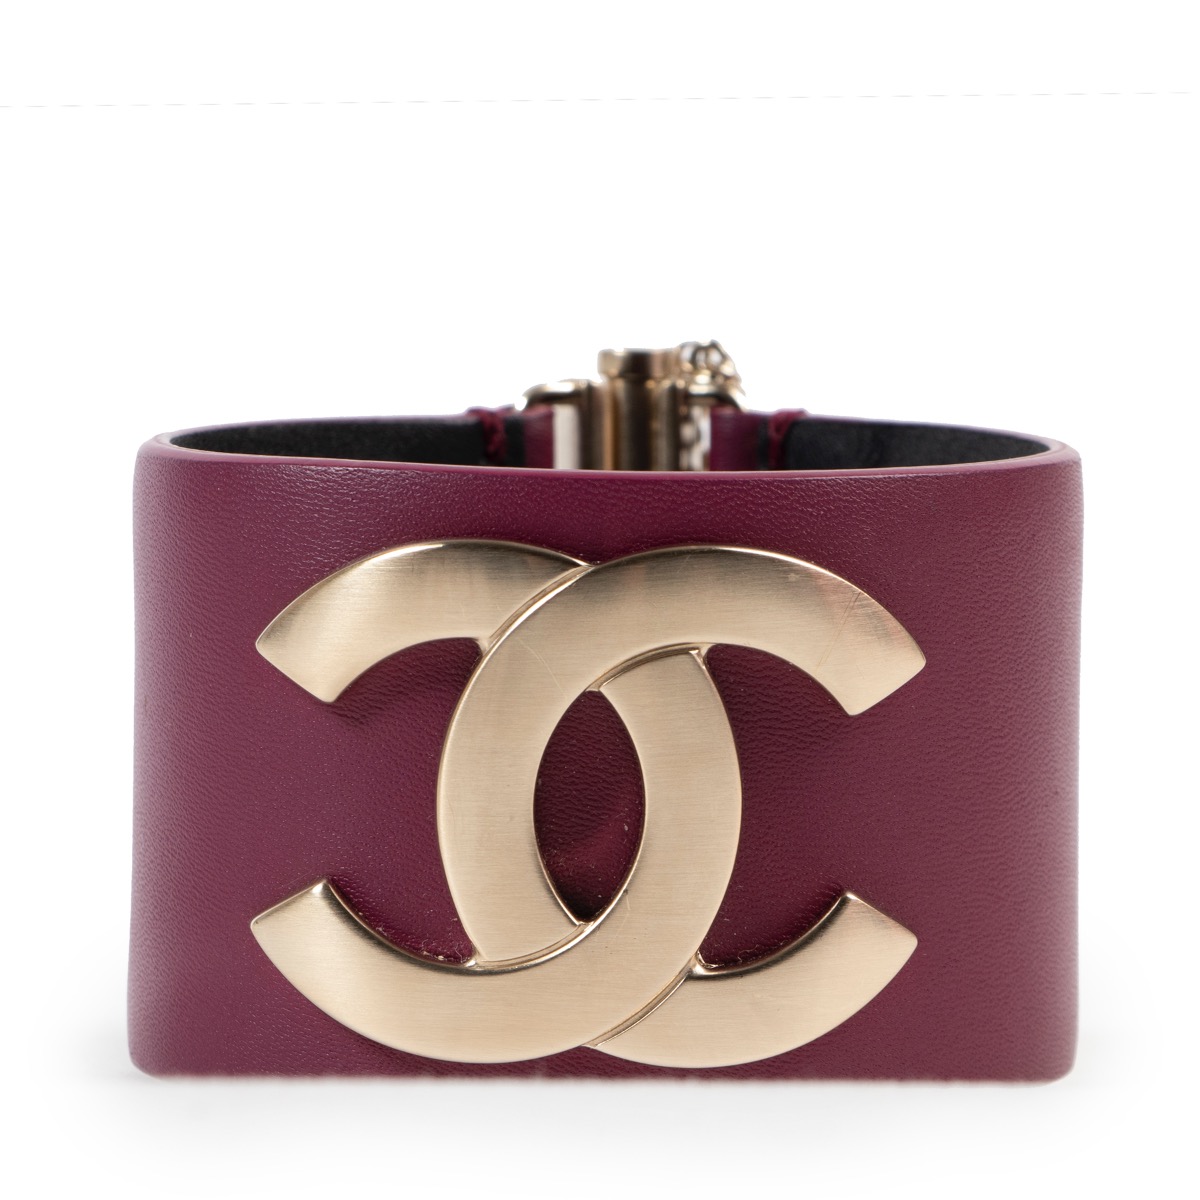 Best 25+ Deals for Chanel Cuff